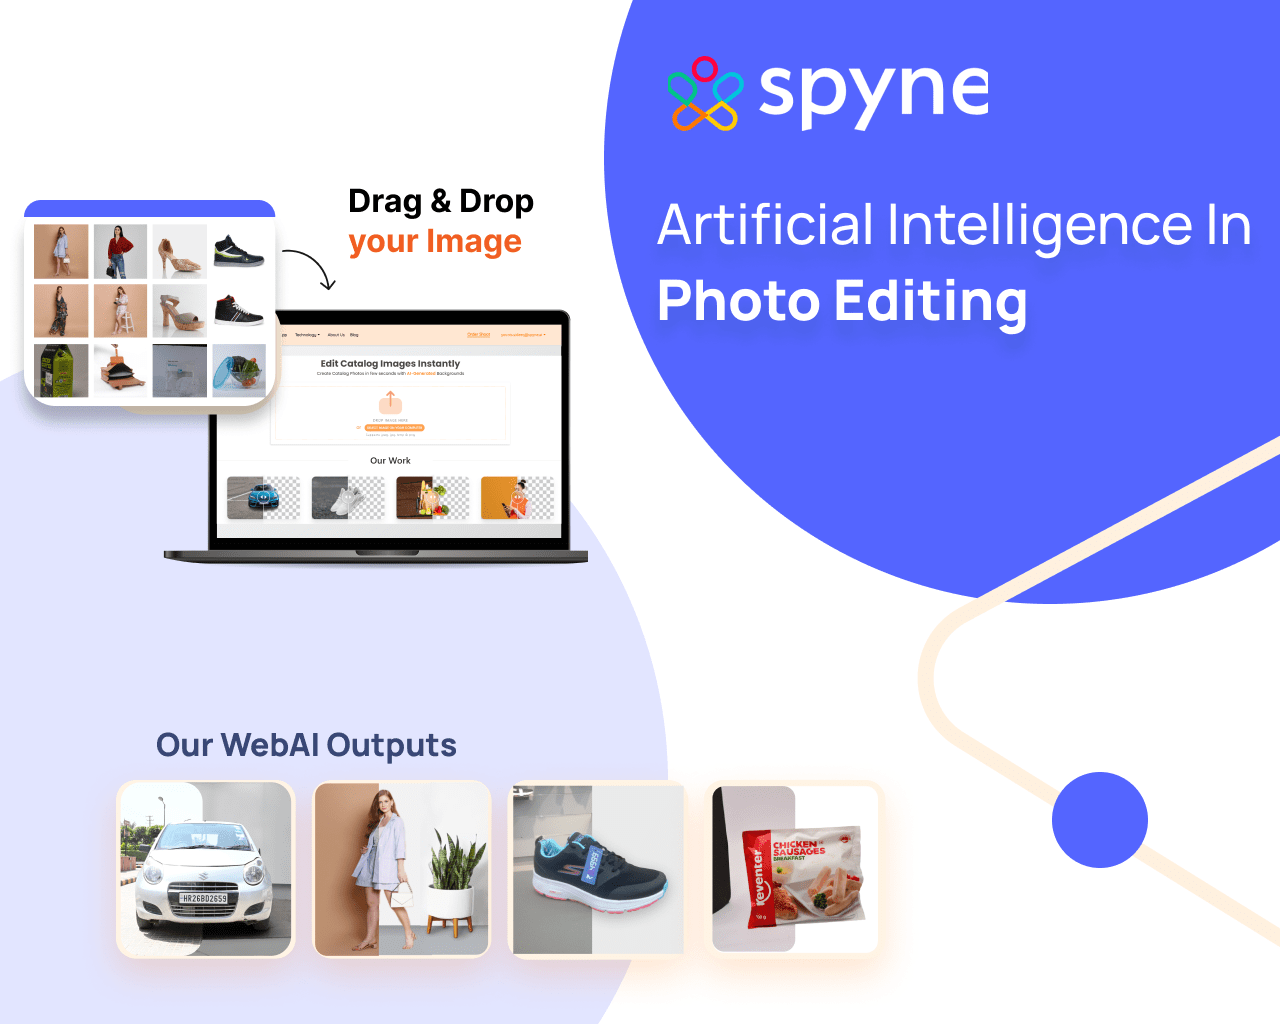 What Is The Future Of Artificial Intelligence In Photo Editing